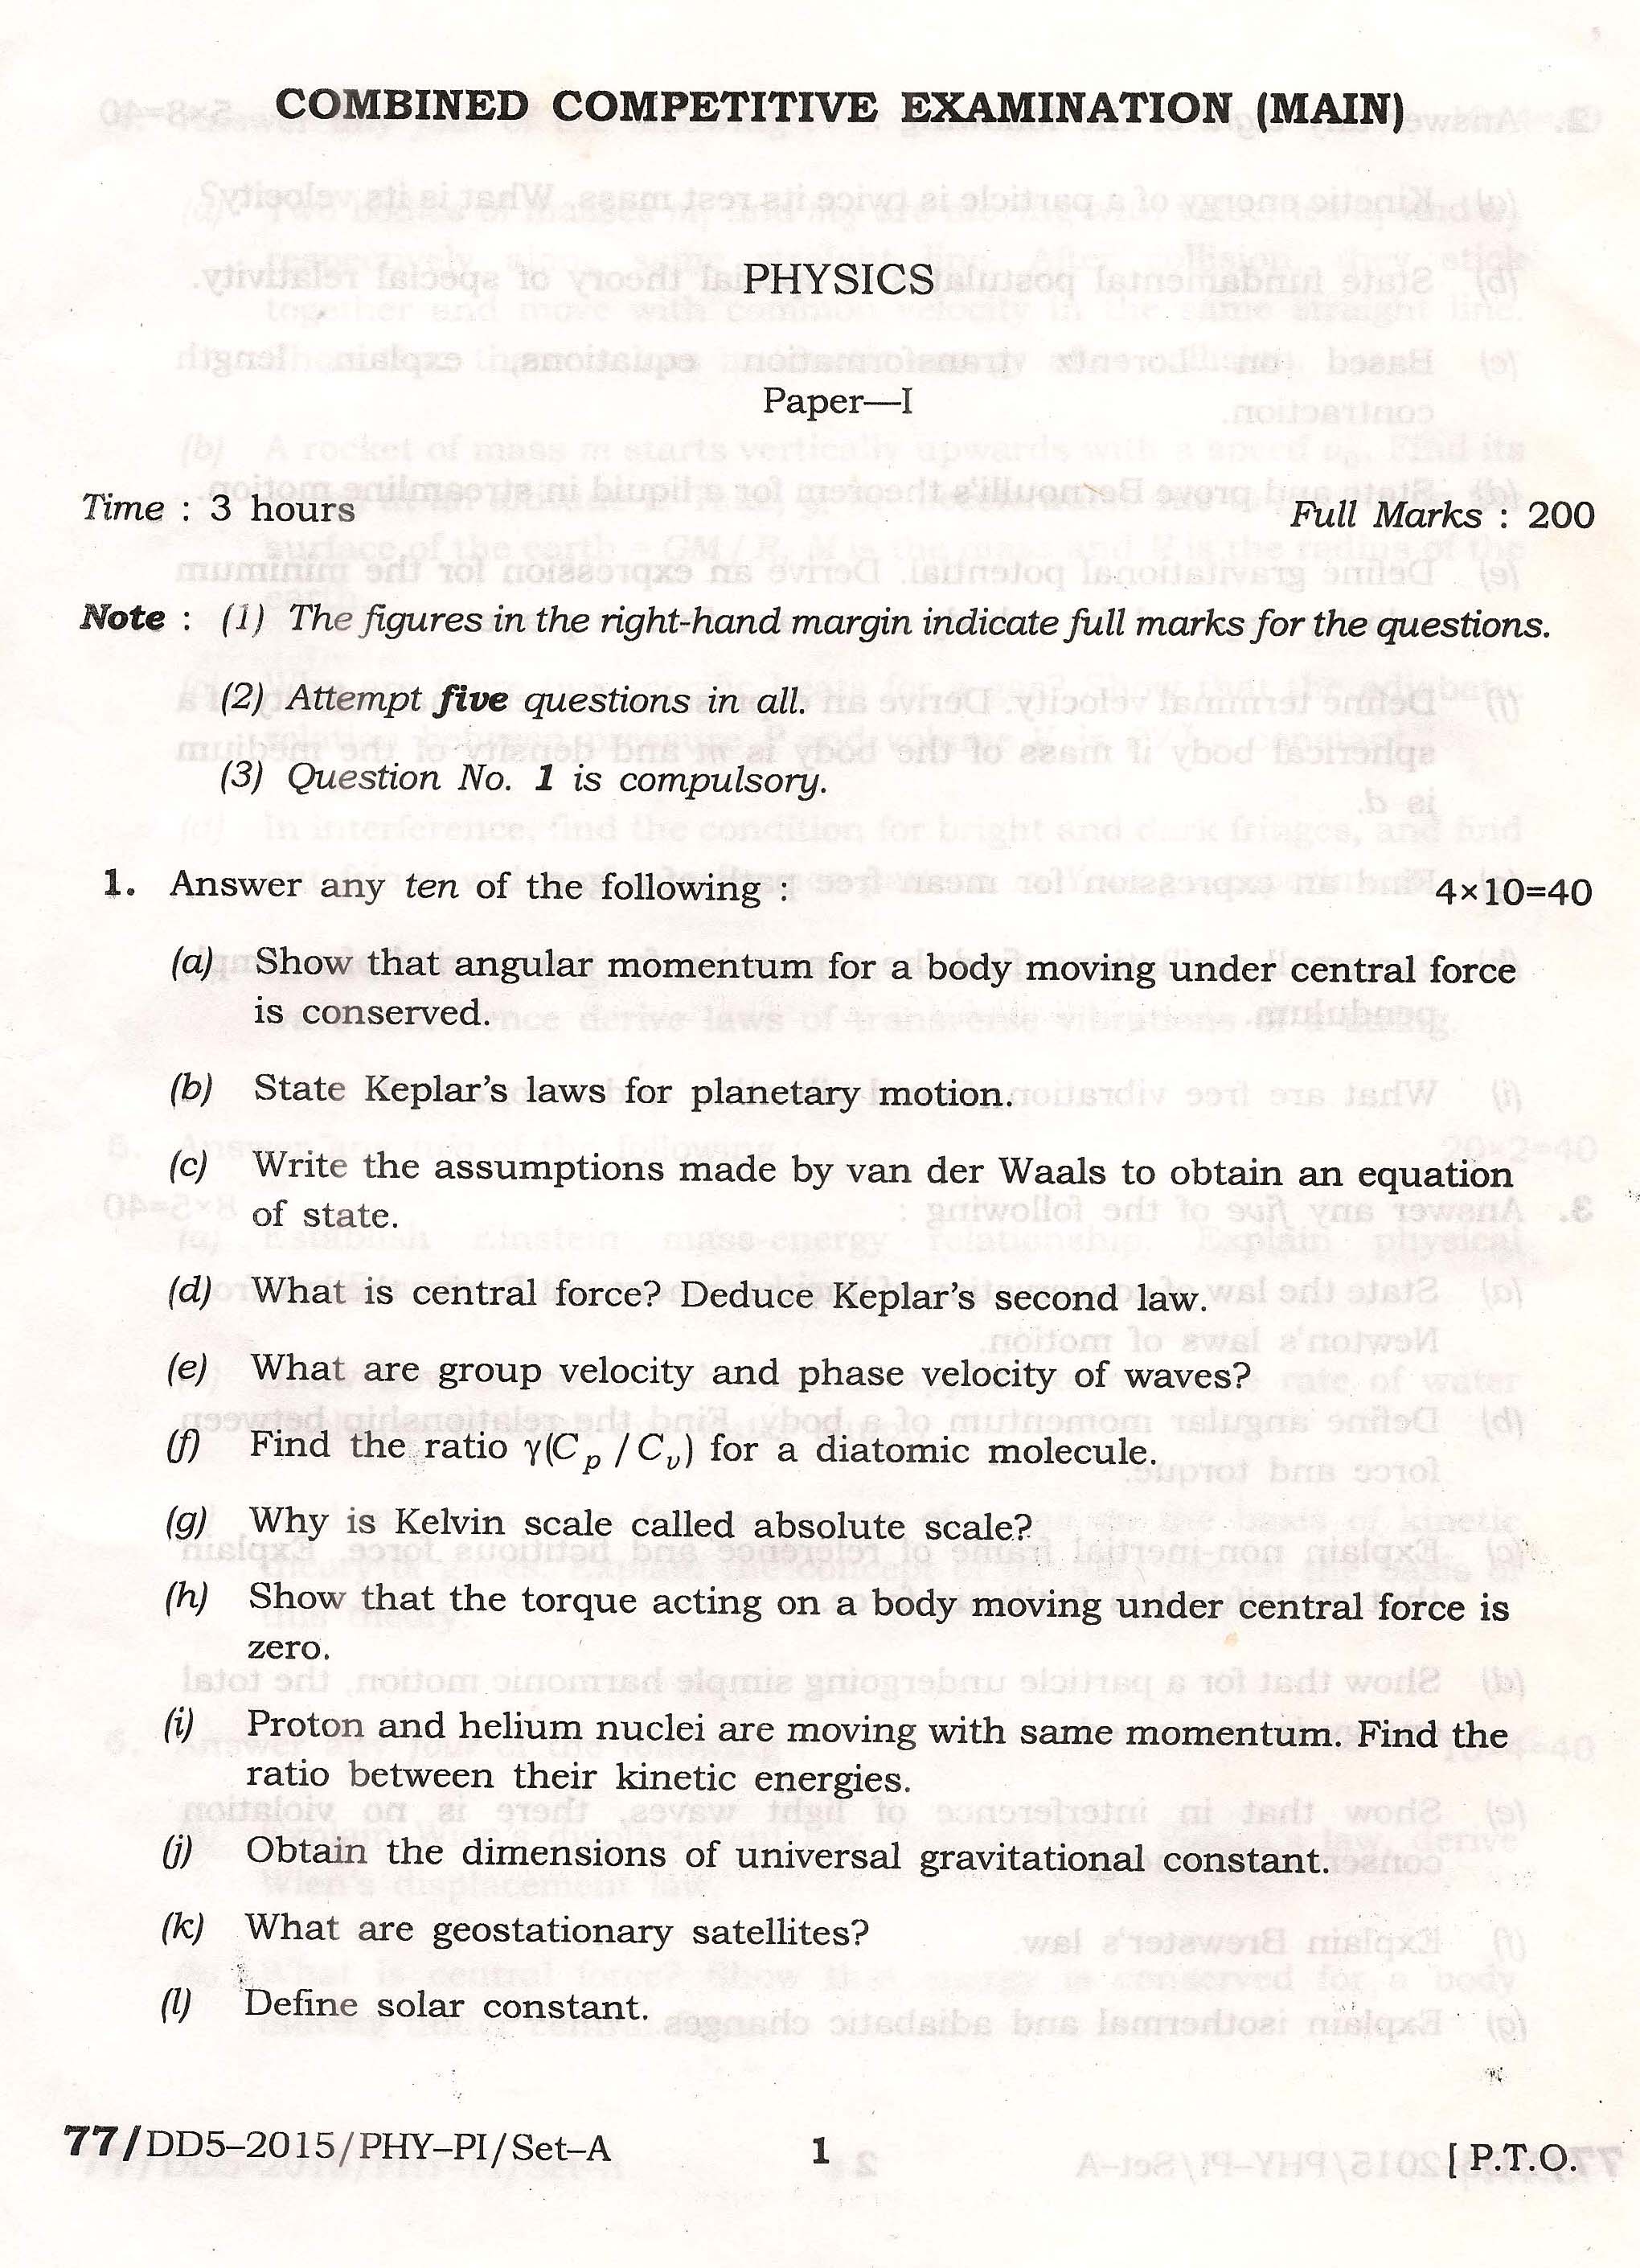 APPSC Combined Competitive Main Exam 2015 Physics Paper I 1